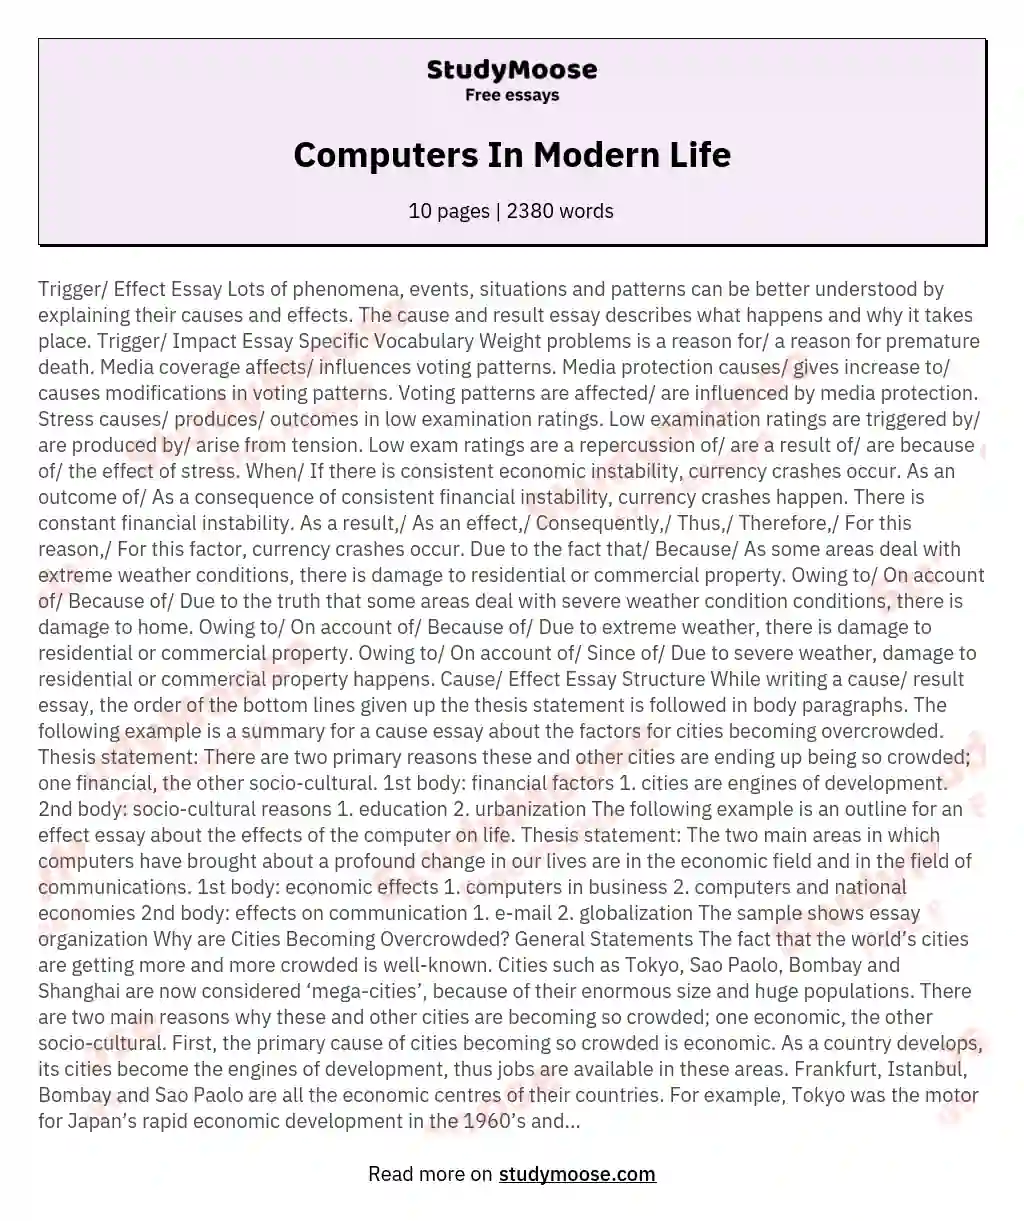 essay on the computer in modern life